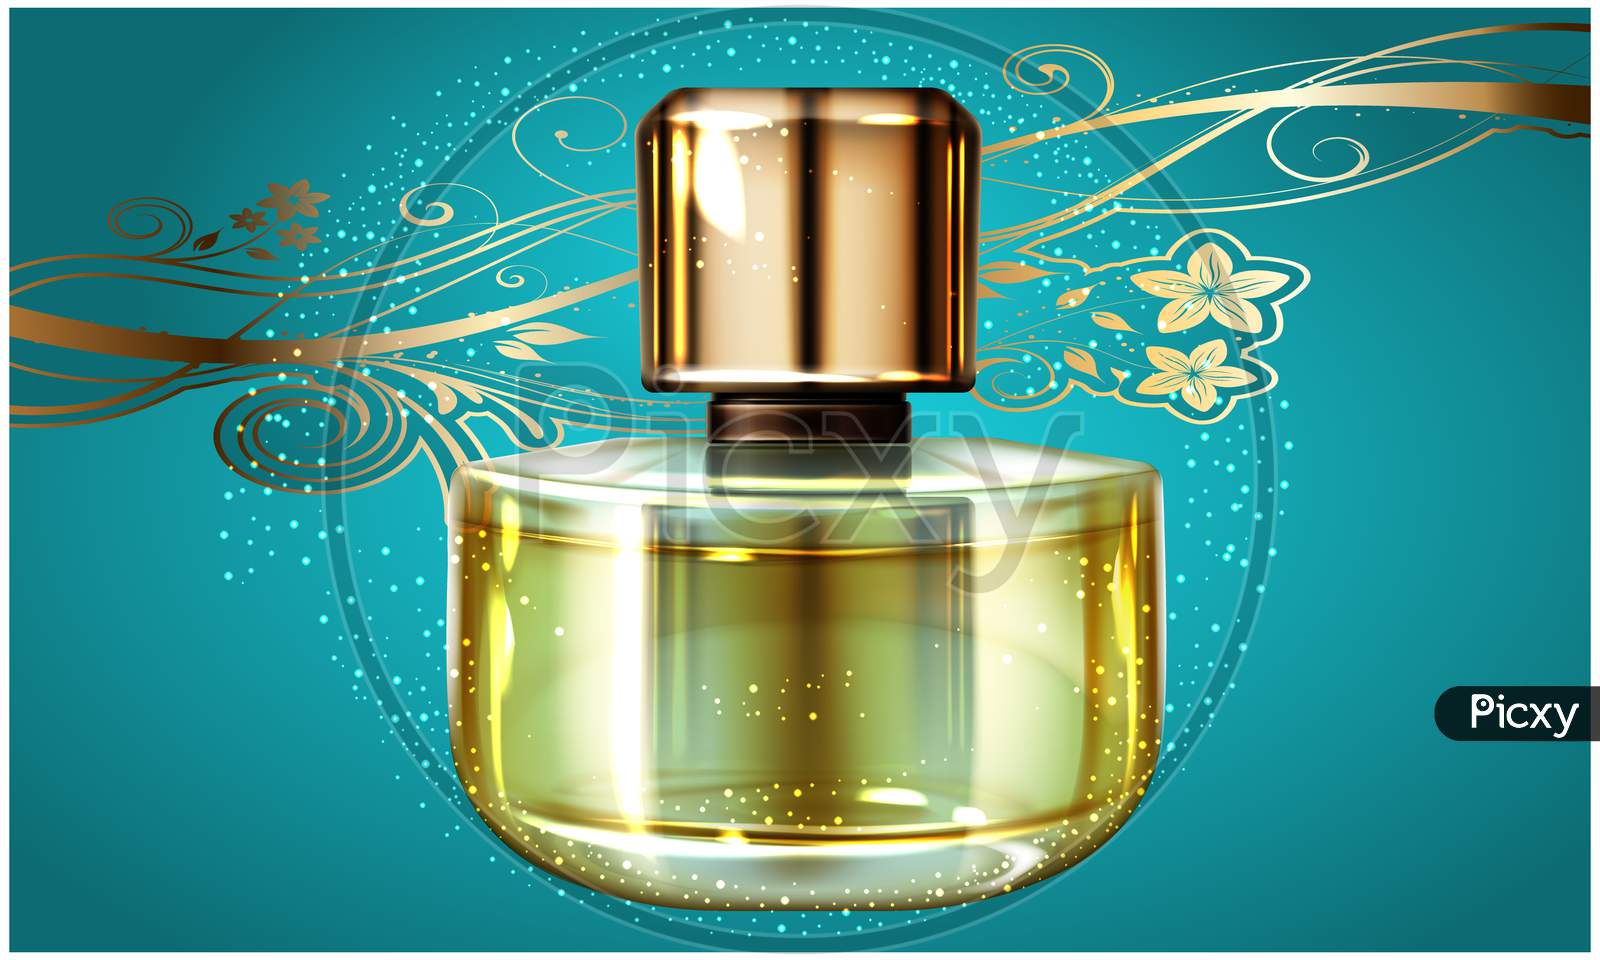 Mock Up Illustration Of Women Perfume On Abstract Background